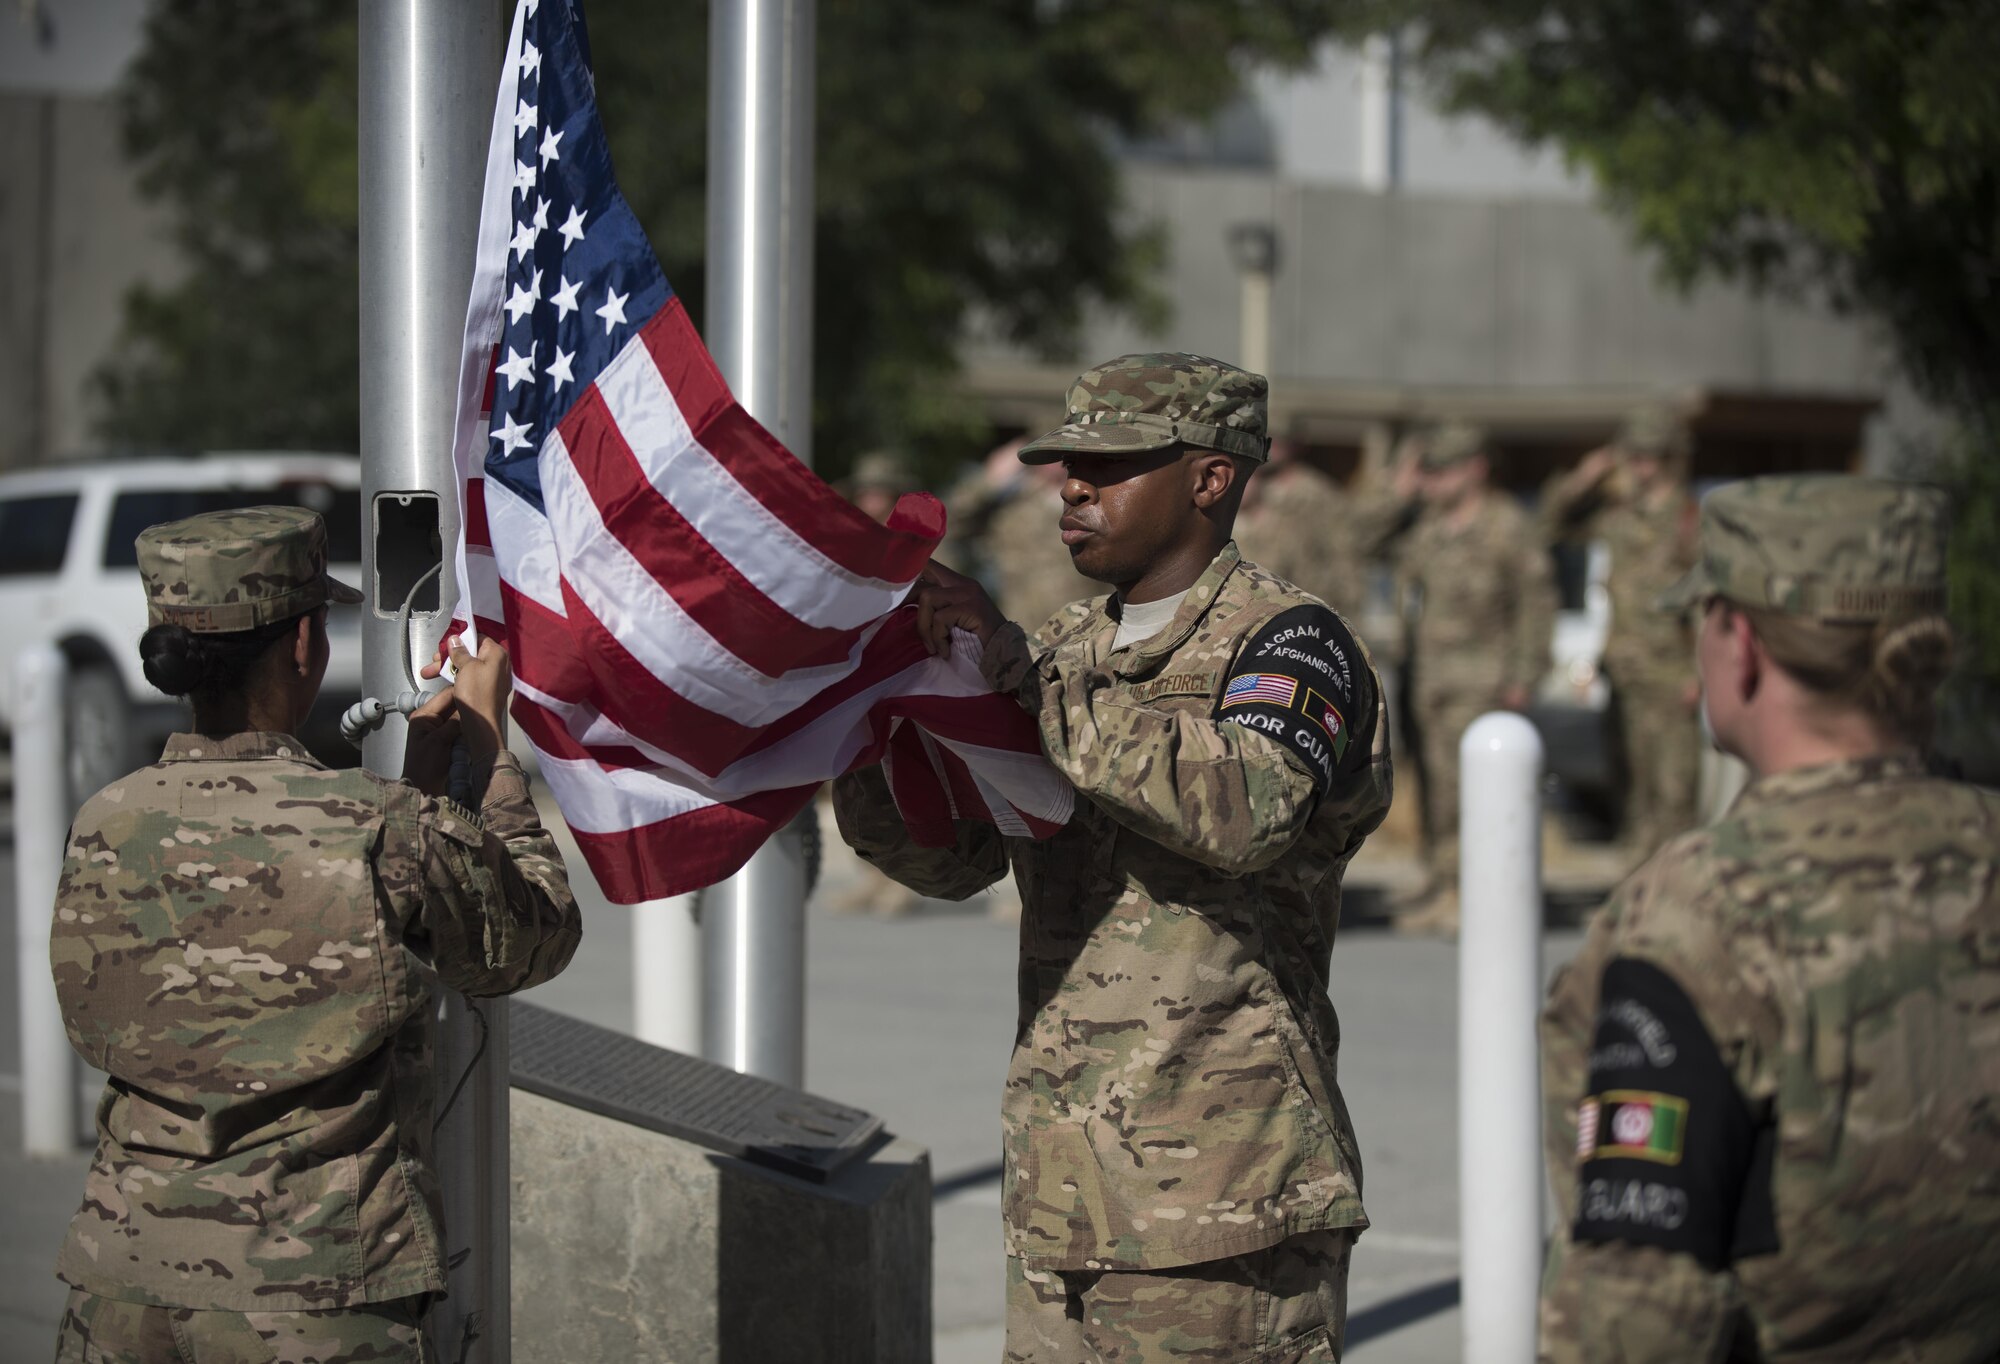 Members of the base Honor Guard team prepare to fold the flag during the Memorial Day remembrance ceremony at Bagram Airfield, Afghanistan, May 30, 2016. Memorial Day, which was first known as Decoration Day, was created during the Civil War. It was proclaimed in 1868 by General John Logan, national commander of the Grand Army of the Republic. The day became a national holiday with the Congressional passage of the National Holiday Act in 1971. (U.S. Air Force photo by Tech. Sgt. Tyrona Lawson)